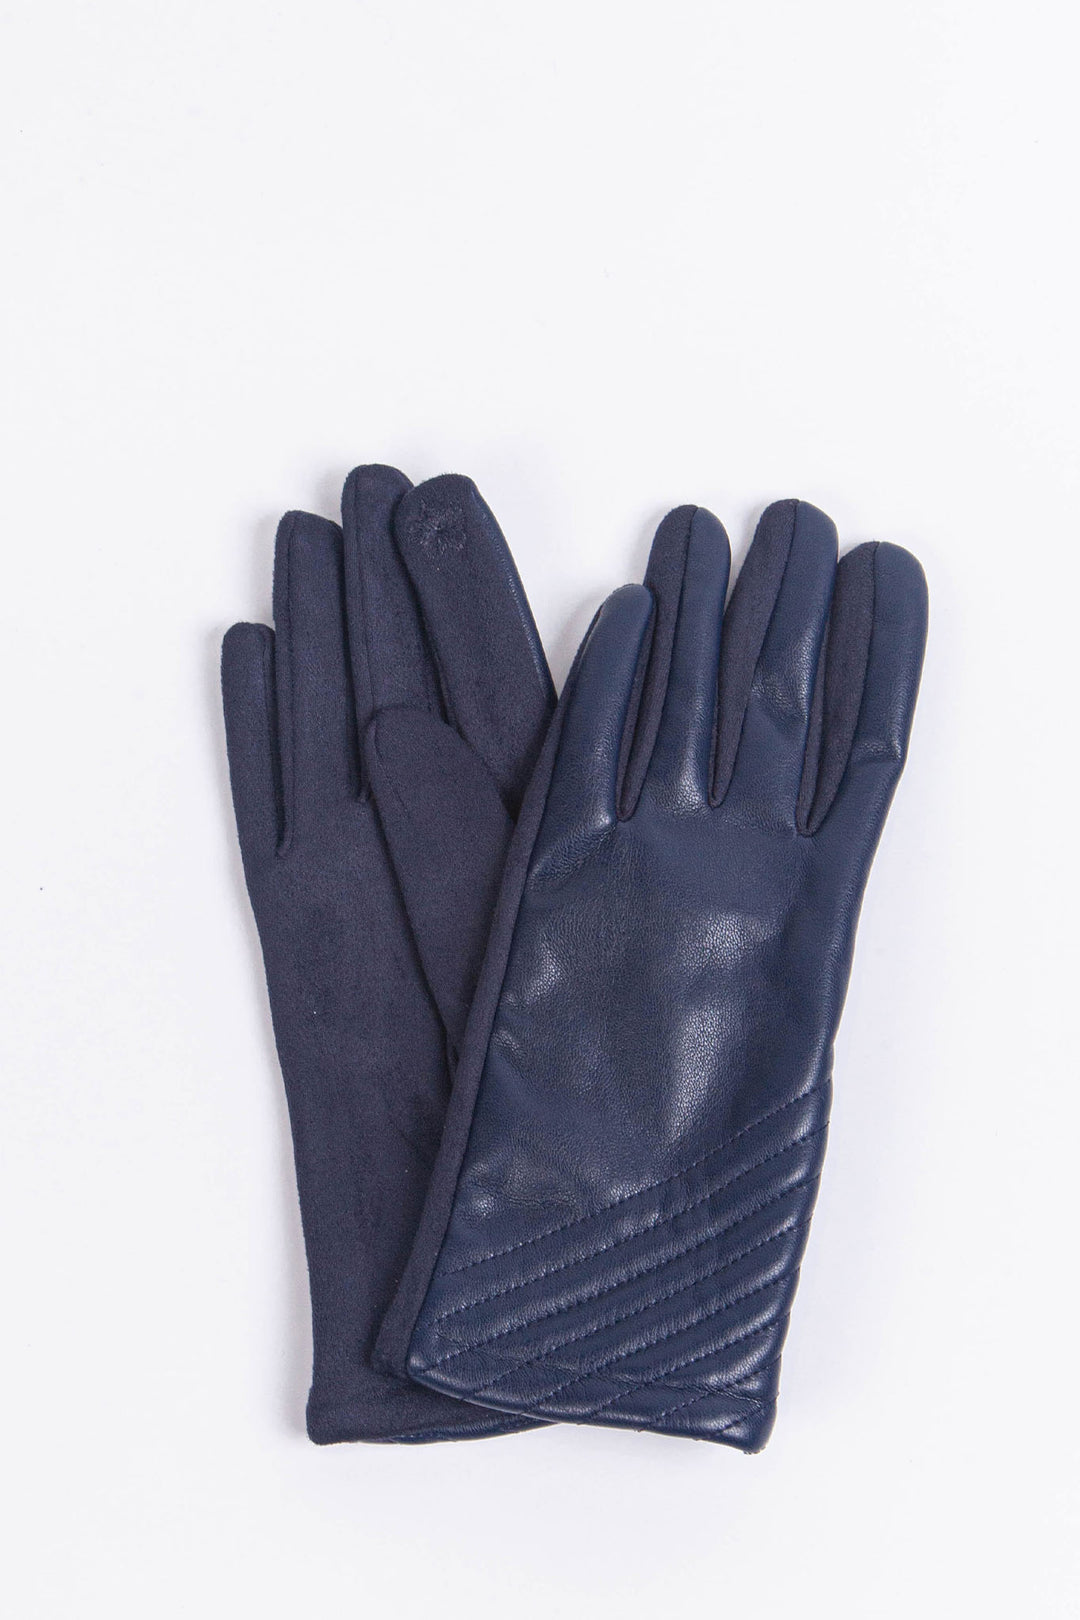 navy blue faux leather gloves with diagonal stitching on the wrists, the gloves have an embroidered detail on the index finger making them touch screen compatible